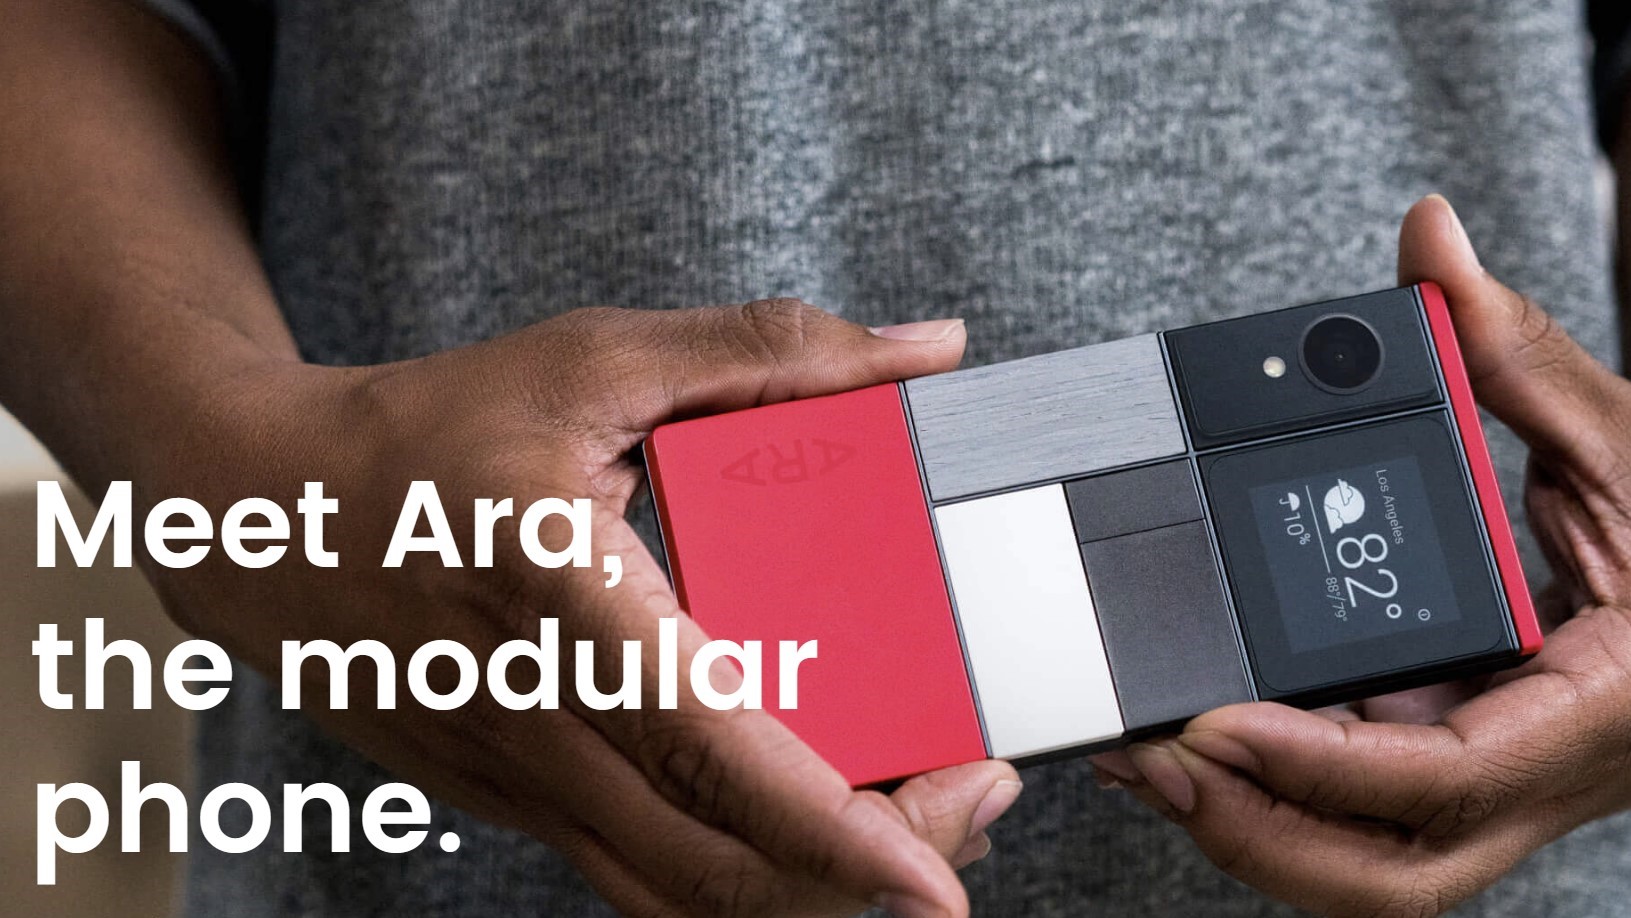 A person holds up a modular Ara phone in an advertisement campaign.